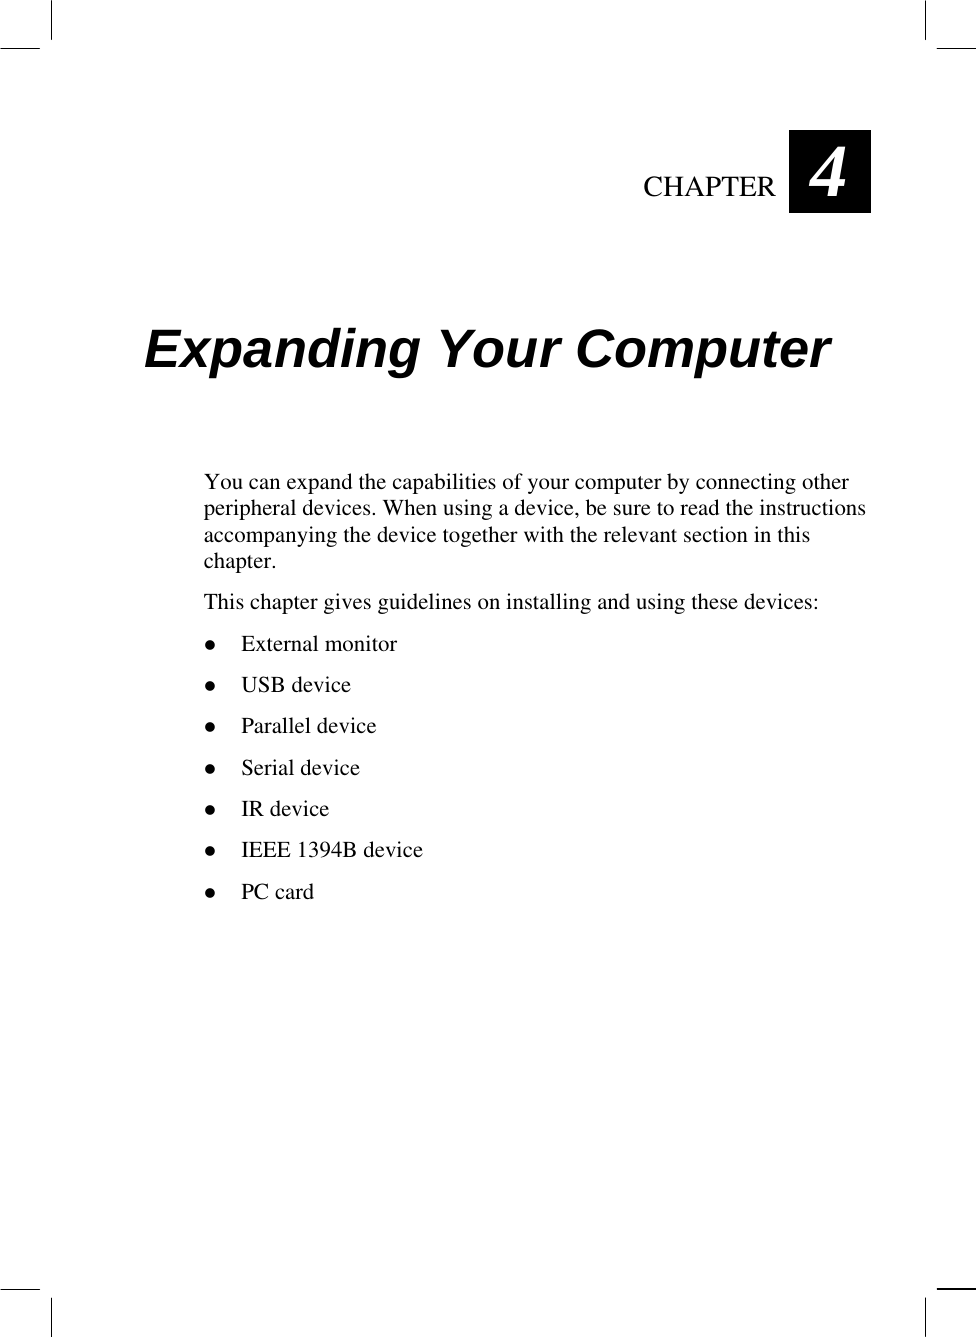  CHAPTER  4 Expanding Your Computer You can expand the capabilities of your computer by connecting other peripheral devices. When using a device, be sure to read the instructions accompanying the device together with the relevant section in this chapter. This chapter gives guidelines on installing and using these devices:   External monitor   USB device   Parallel device   Serial device   IR device   IEEE 1394B device   PC card   